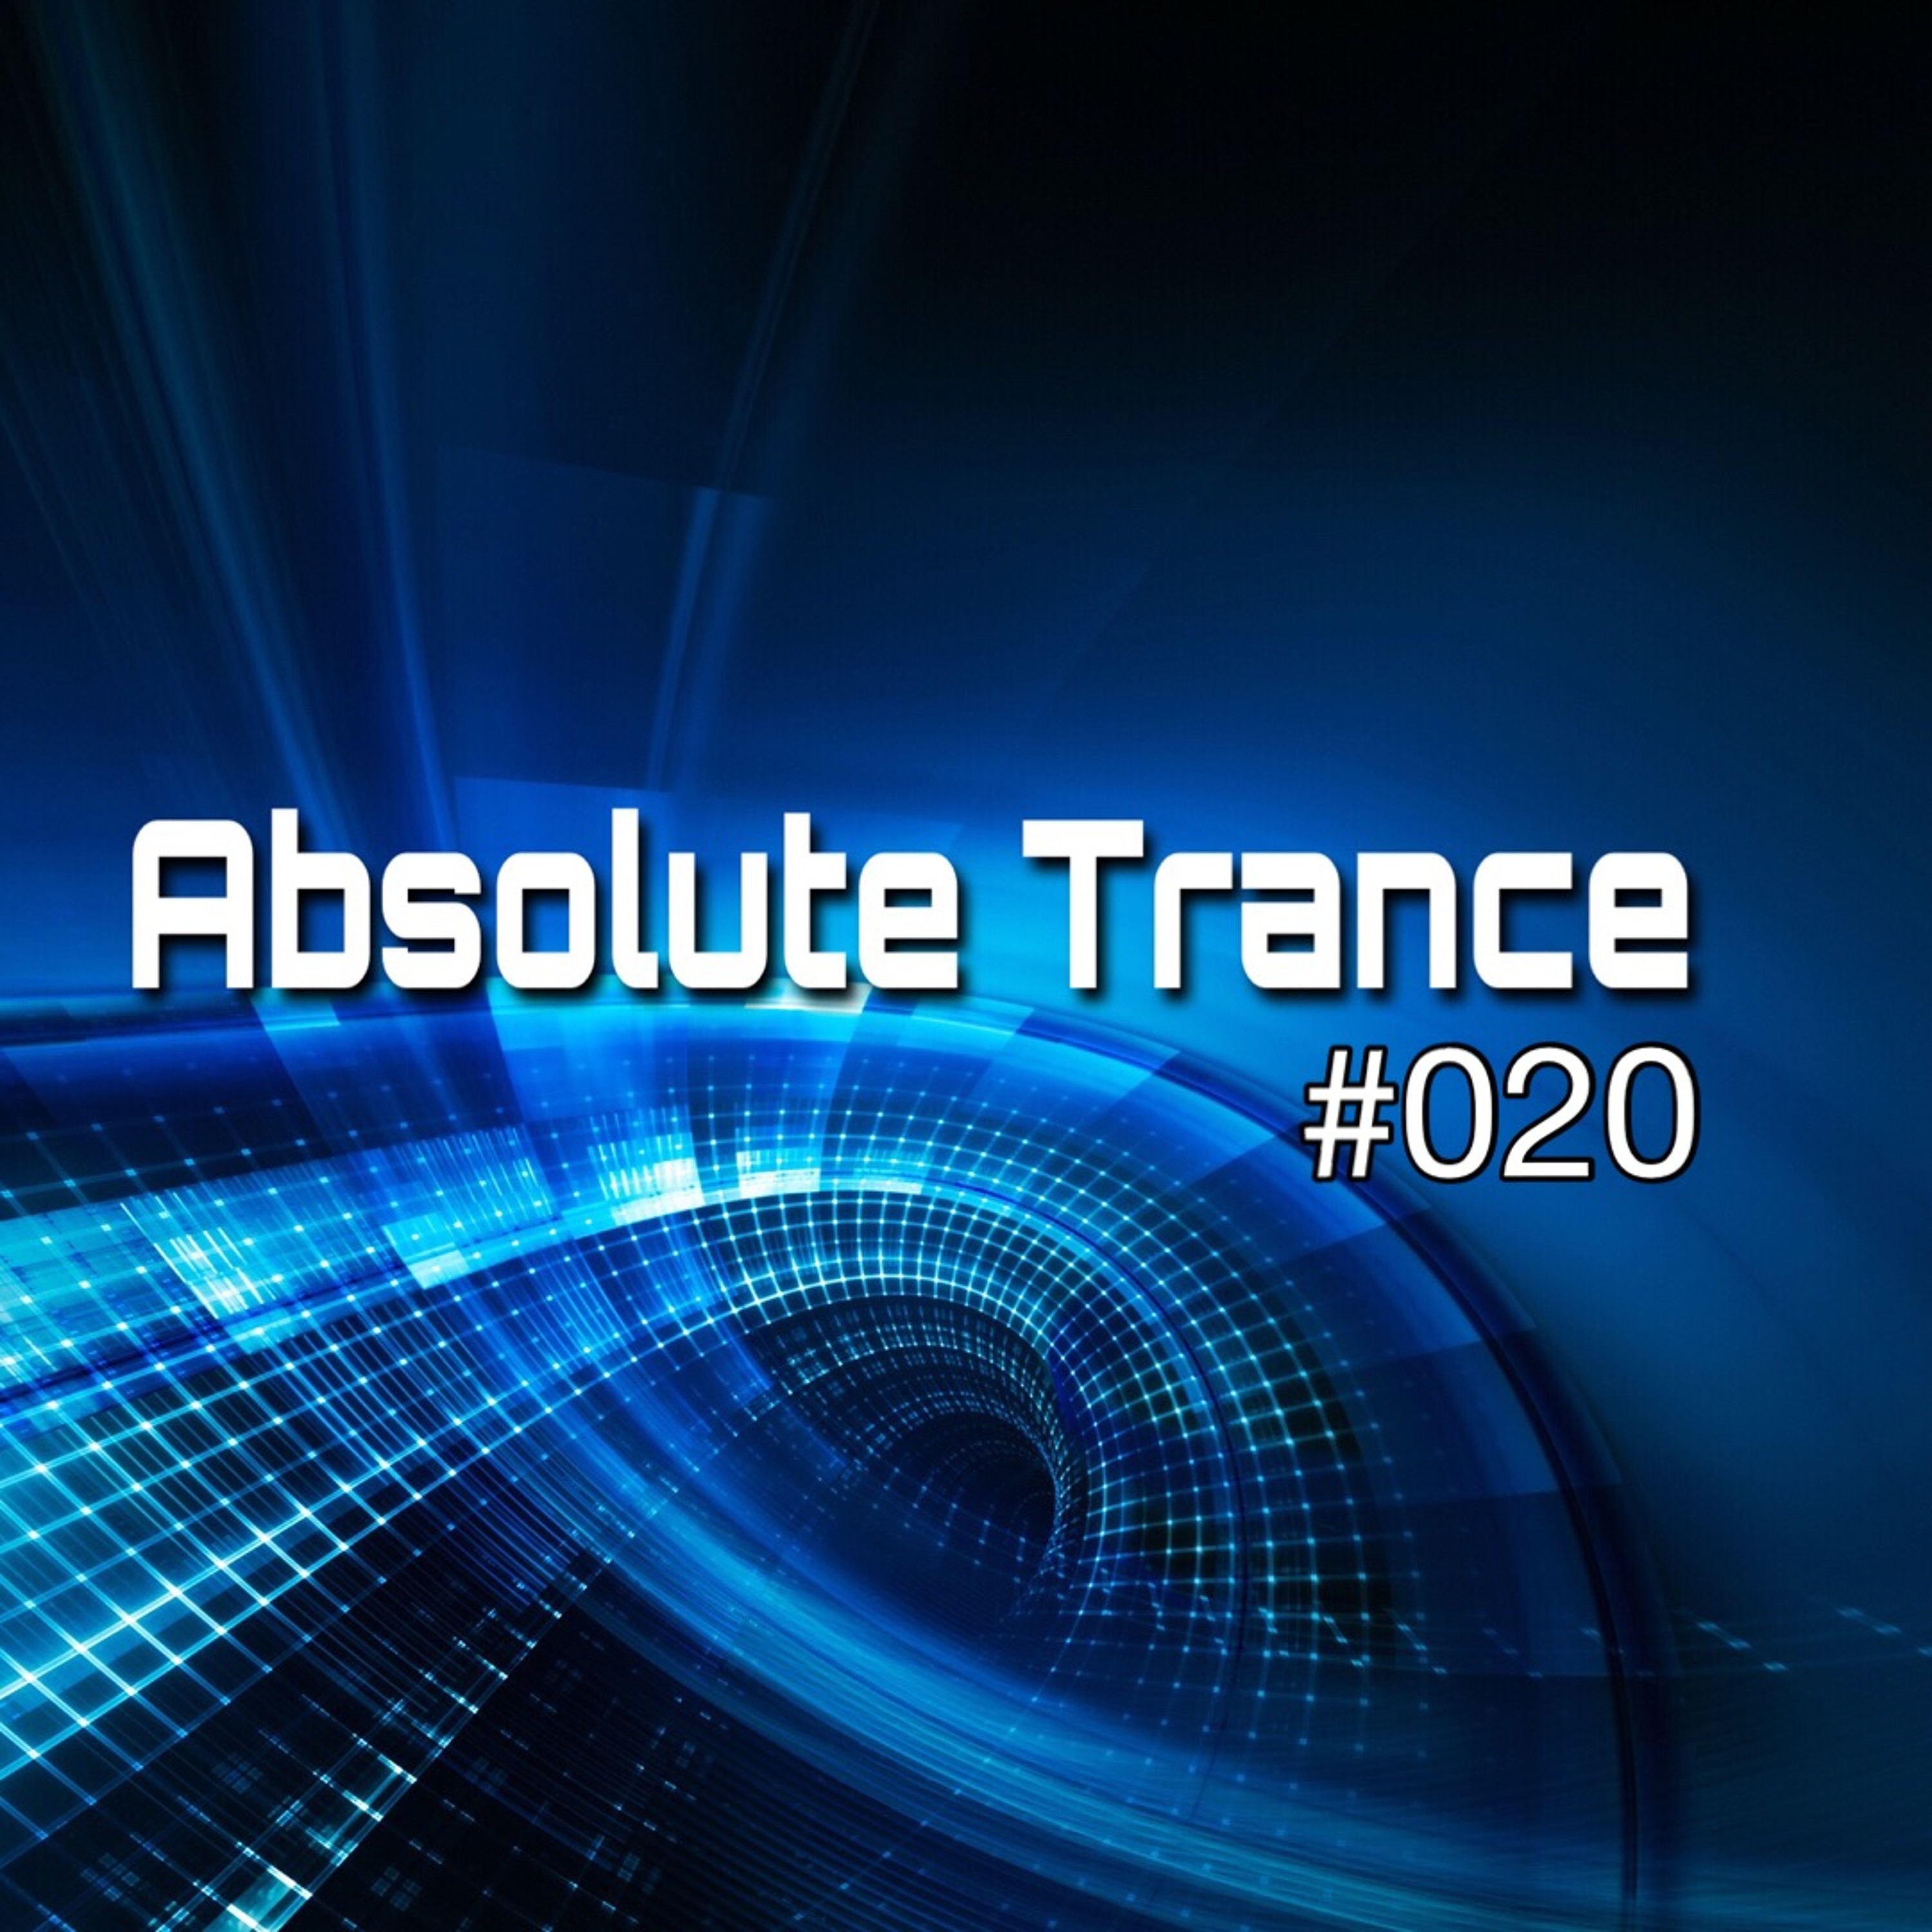 Absolute Trance #020